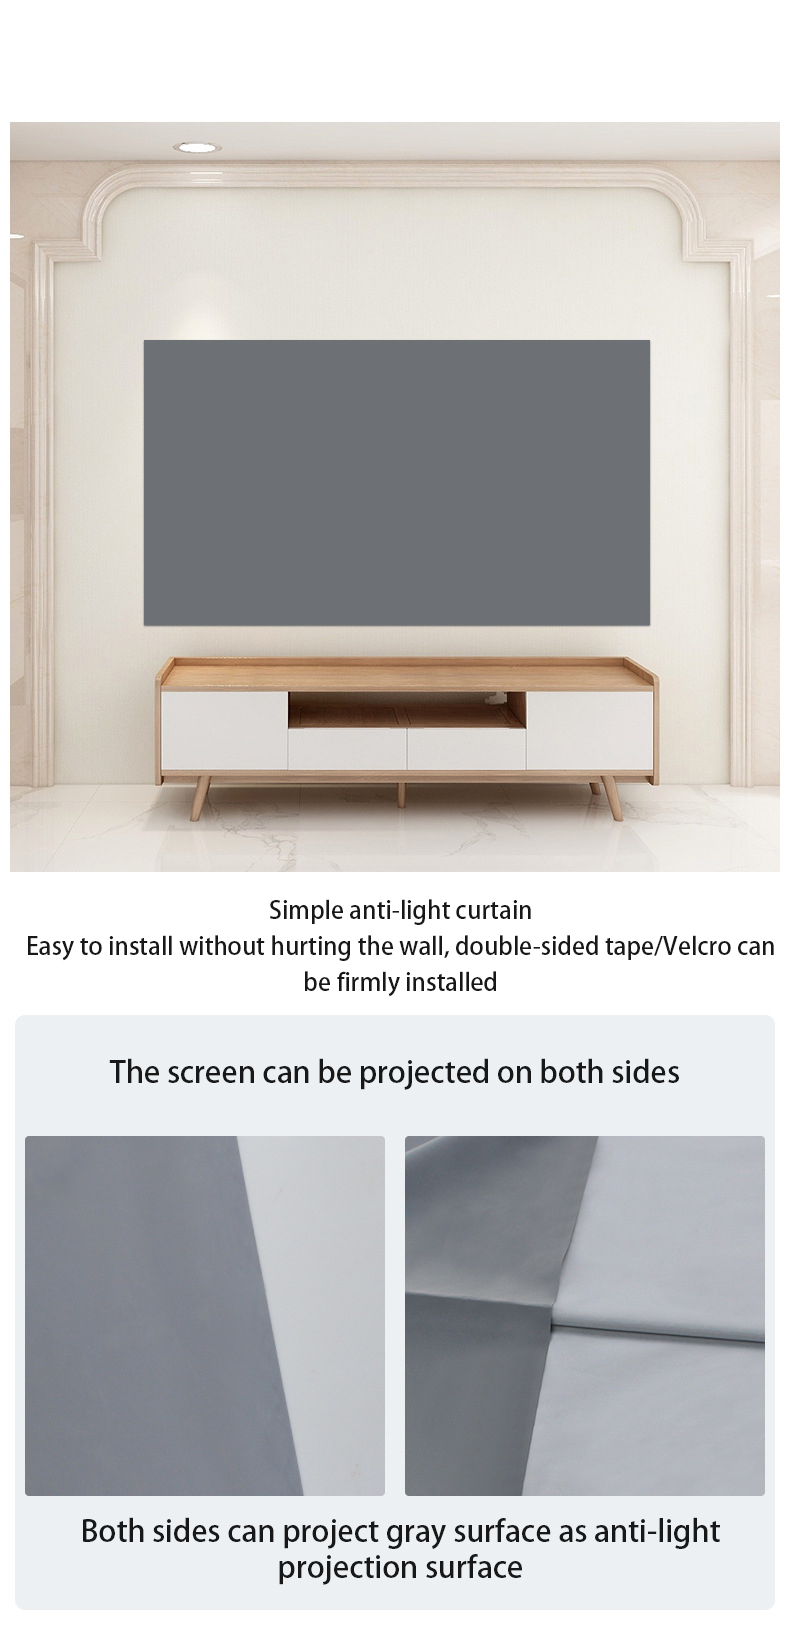 4K High-Definition Projector Screen 90-Inch 16:9 Metal Material Foldable Anti-light Curtain Simple Home Projector Portable Projector Screen